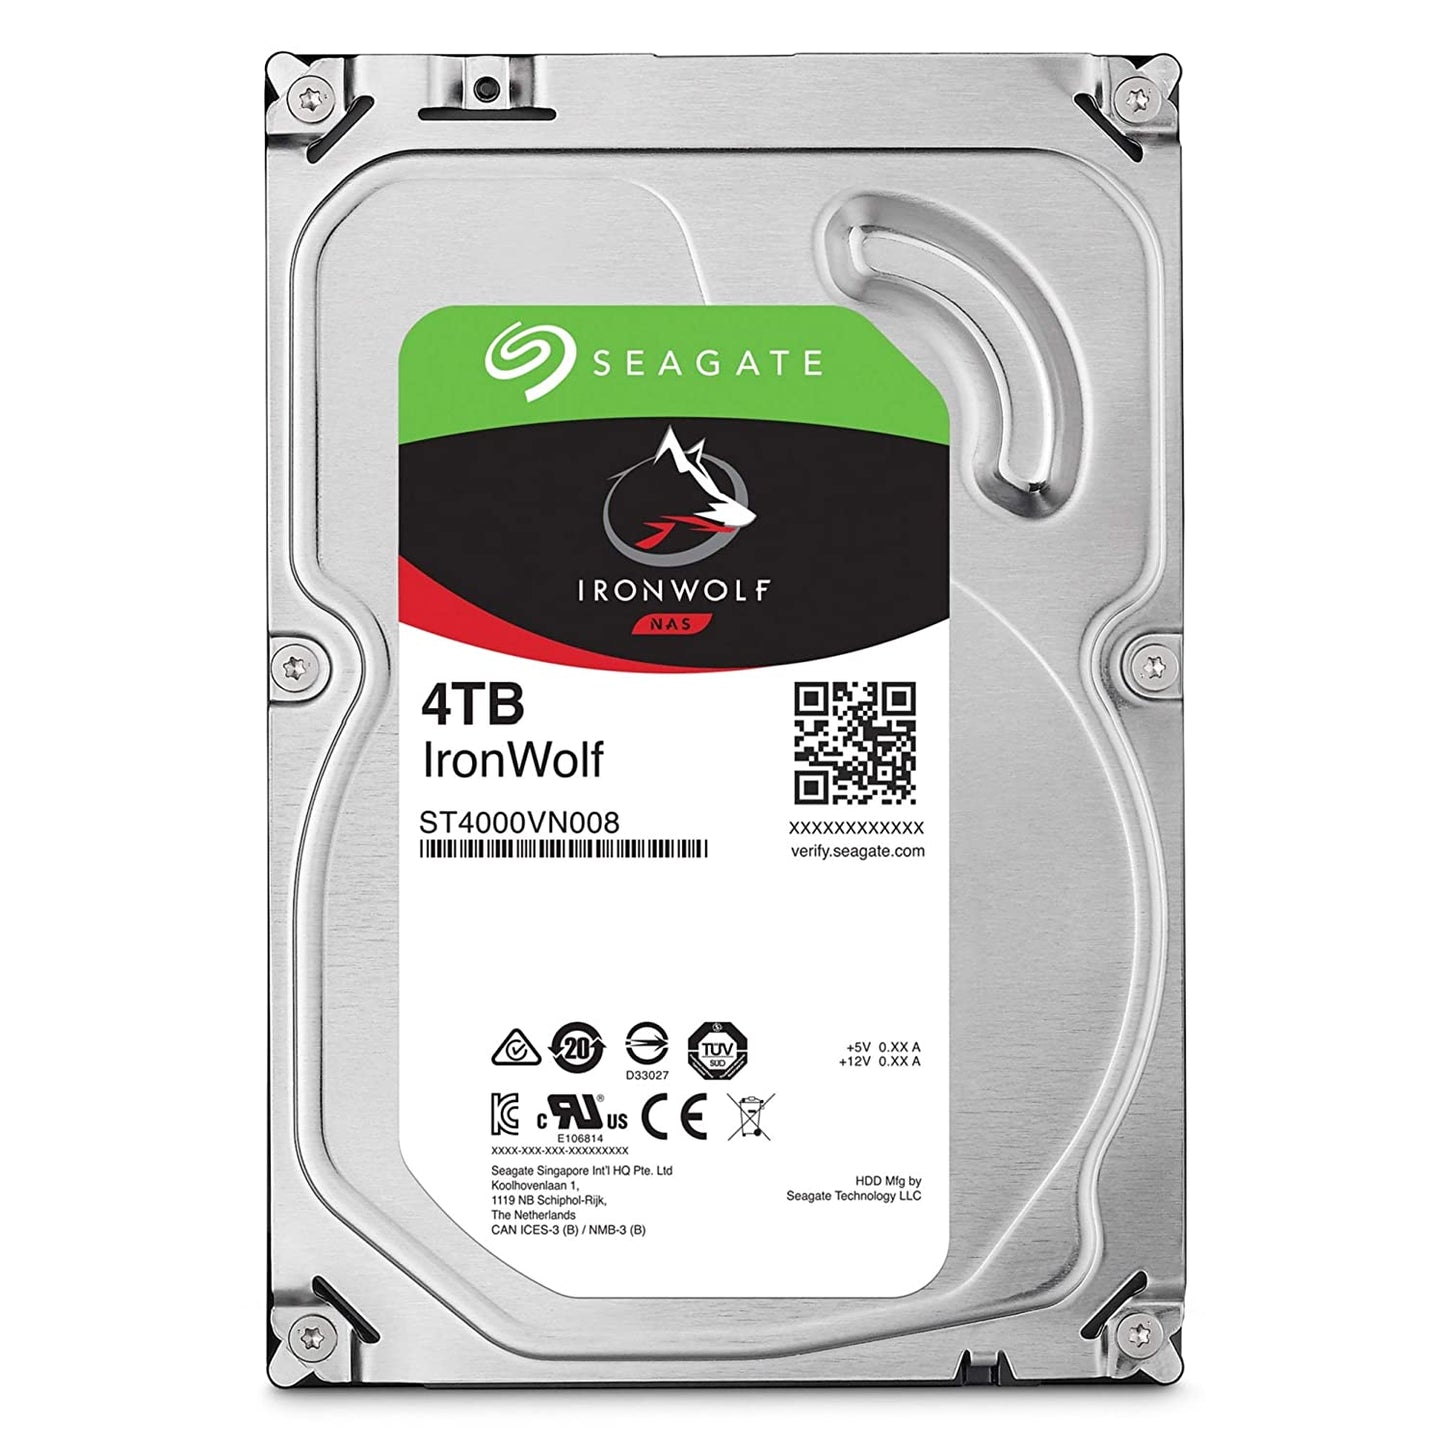 Seagate IronWolf NAS 5900RPM Internal SATA Hard Drive 4TB 6Gb/s 3.5-Inch - Frustration Free Packaging (ST4000VN008)